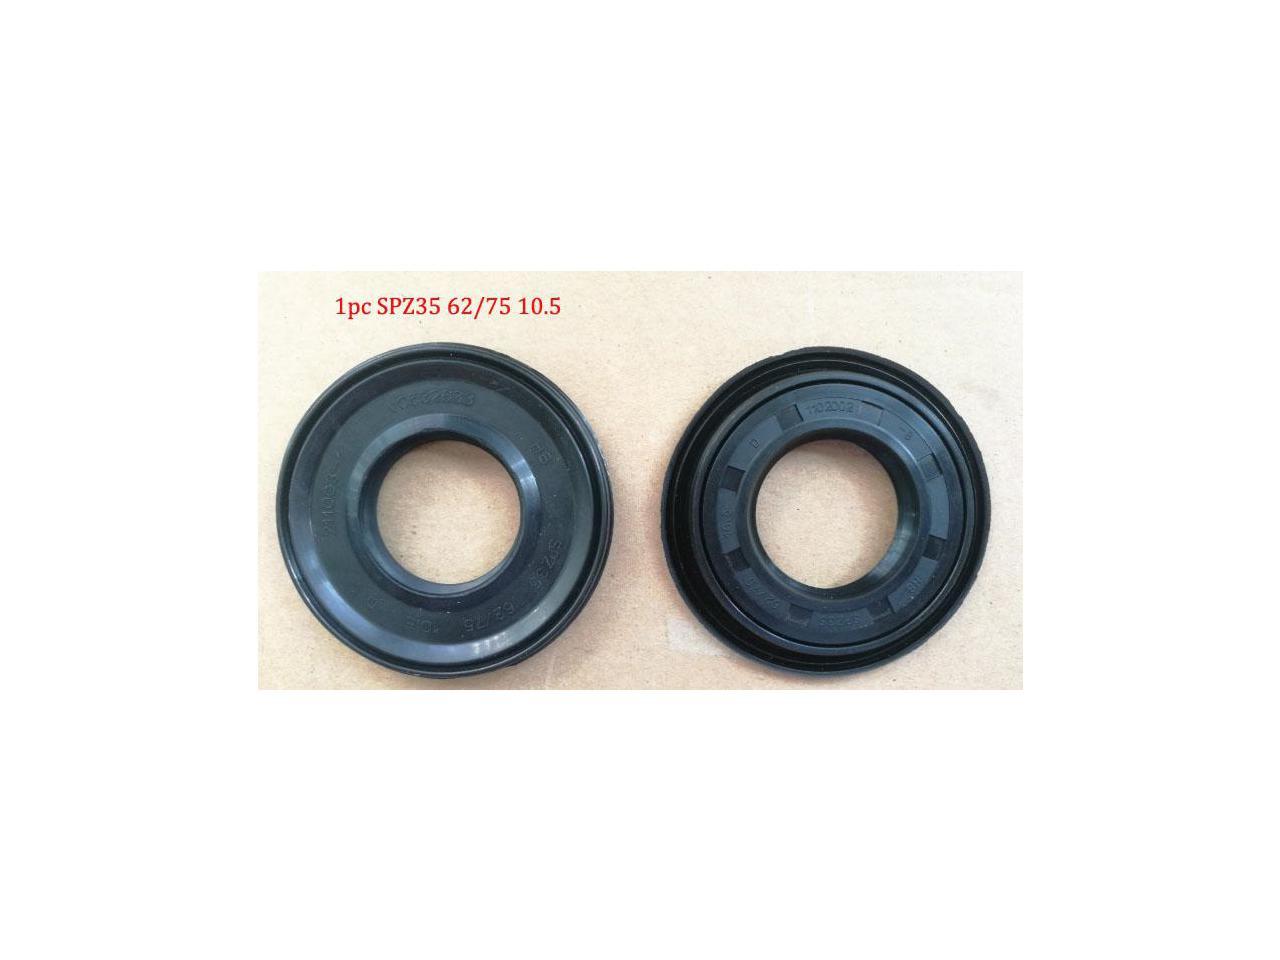 1PC Water Seal SP 40 72 10/11.5 Oil Seal For Haier Roller Washing Machine 